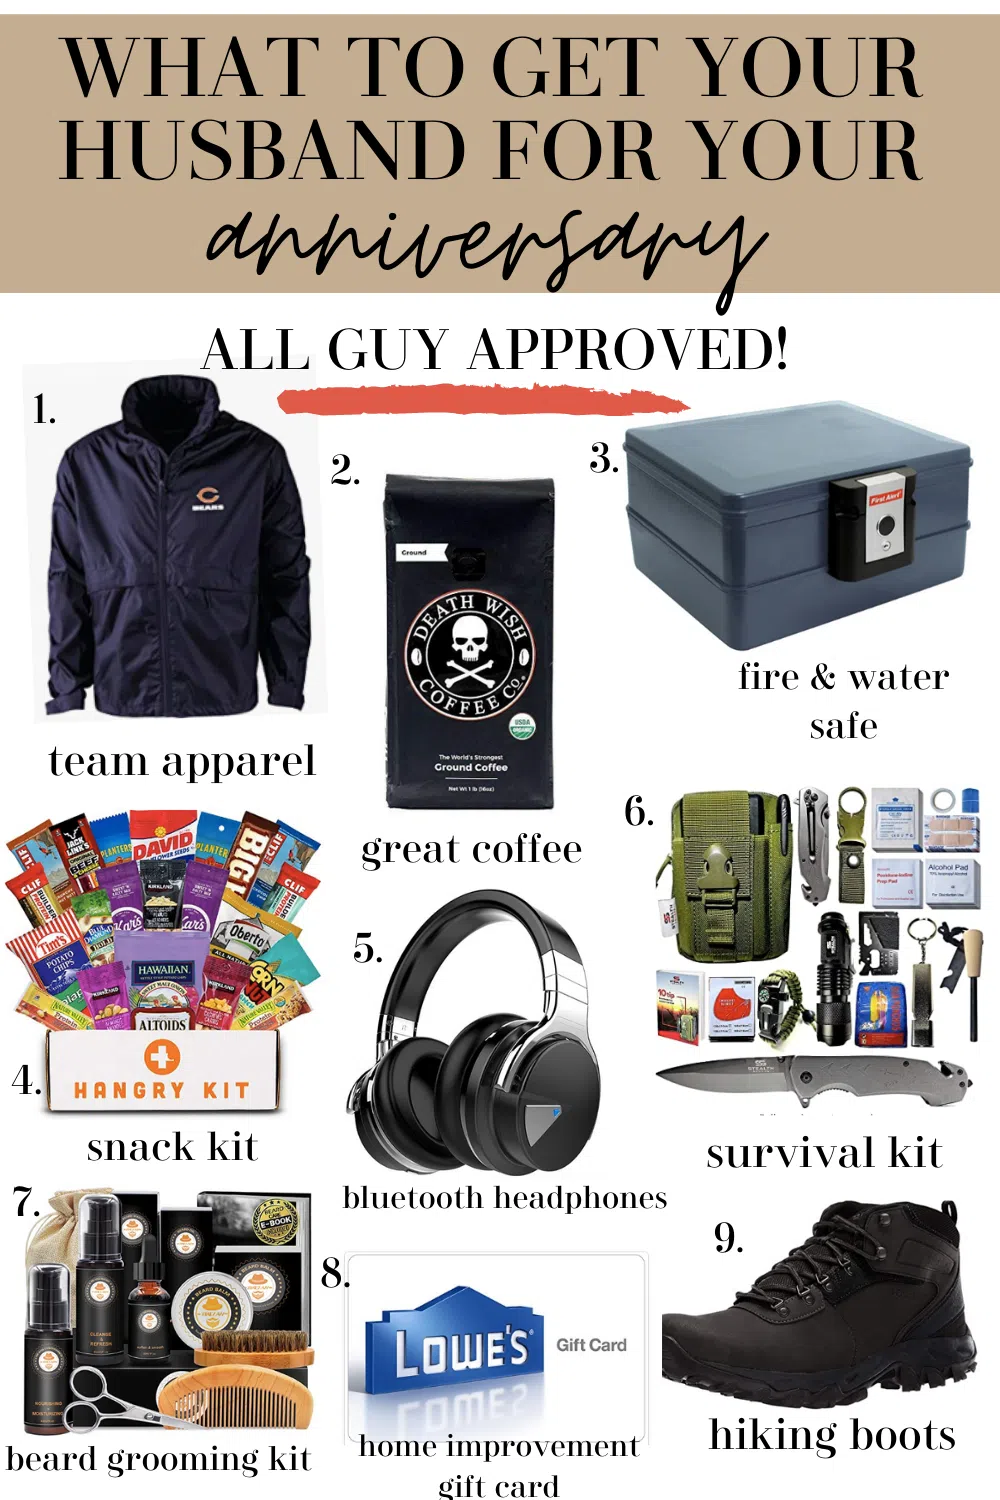 what to get your husband for your anniversary